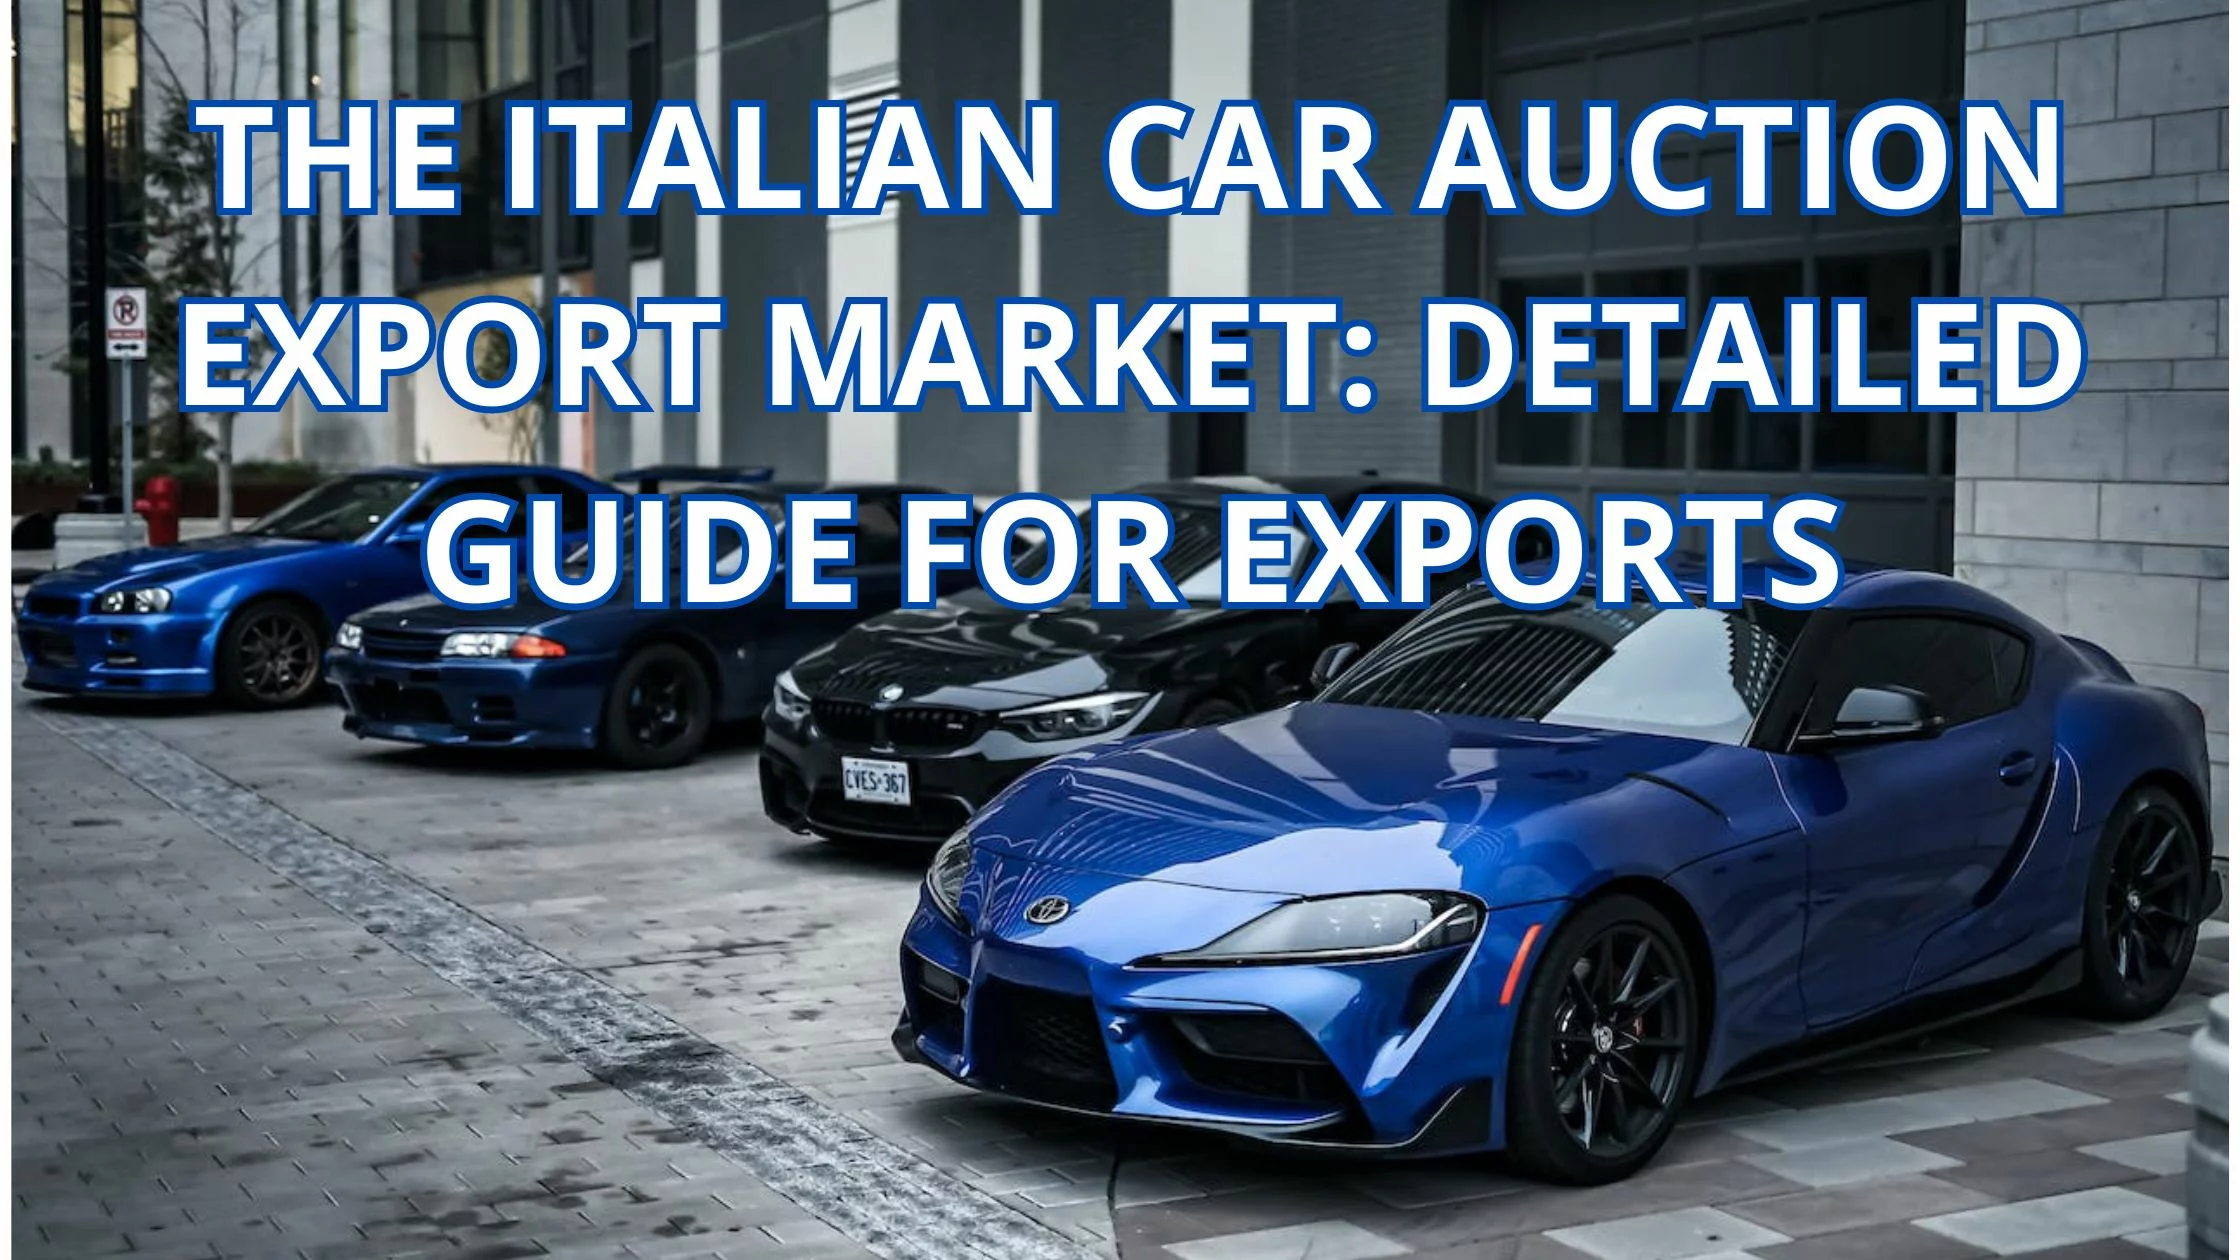 The Italian Car Auction Export Market Detailed Guide For Exports